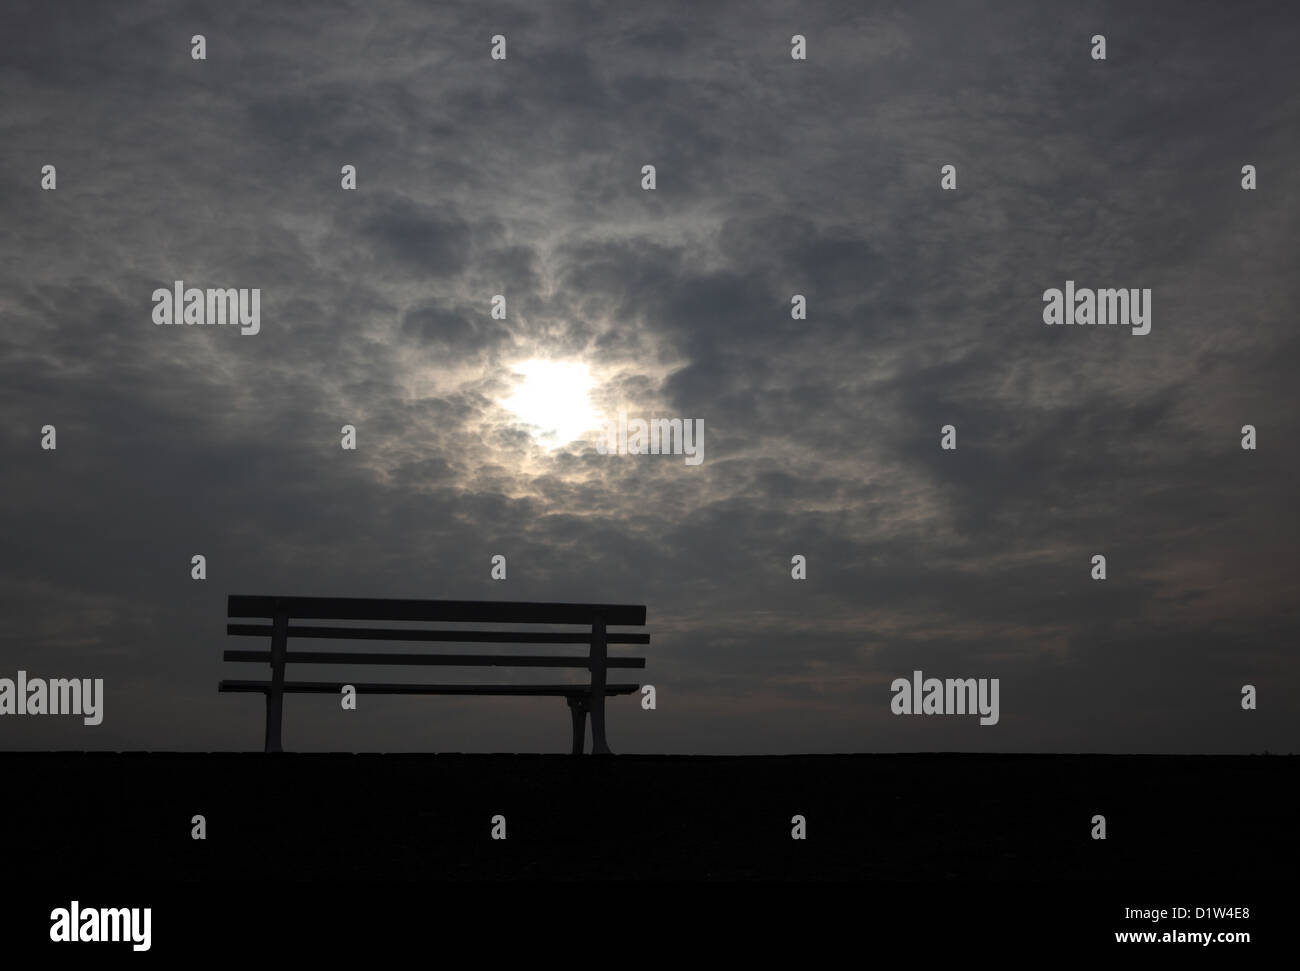 Hanover, silhouette, empty park bench in front of cloudy sky Stock Photo